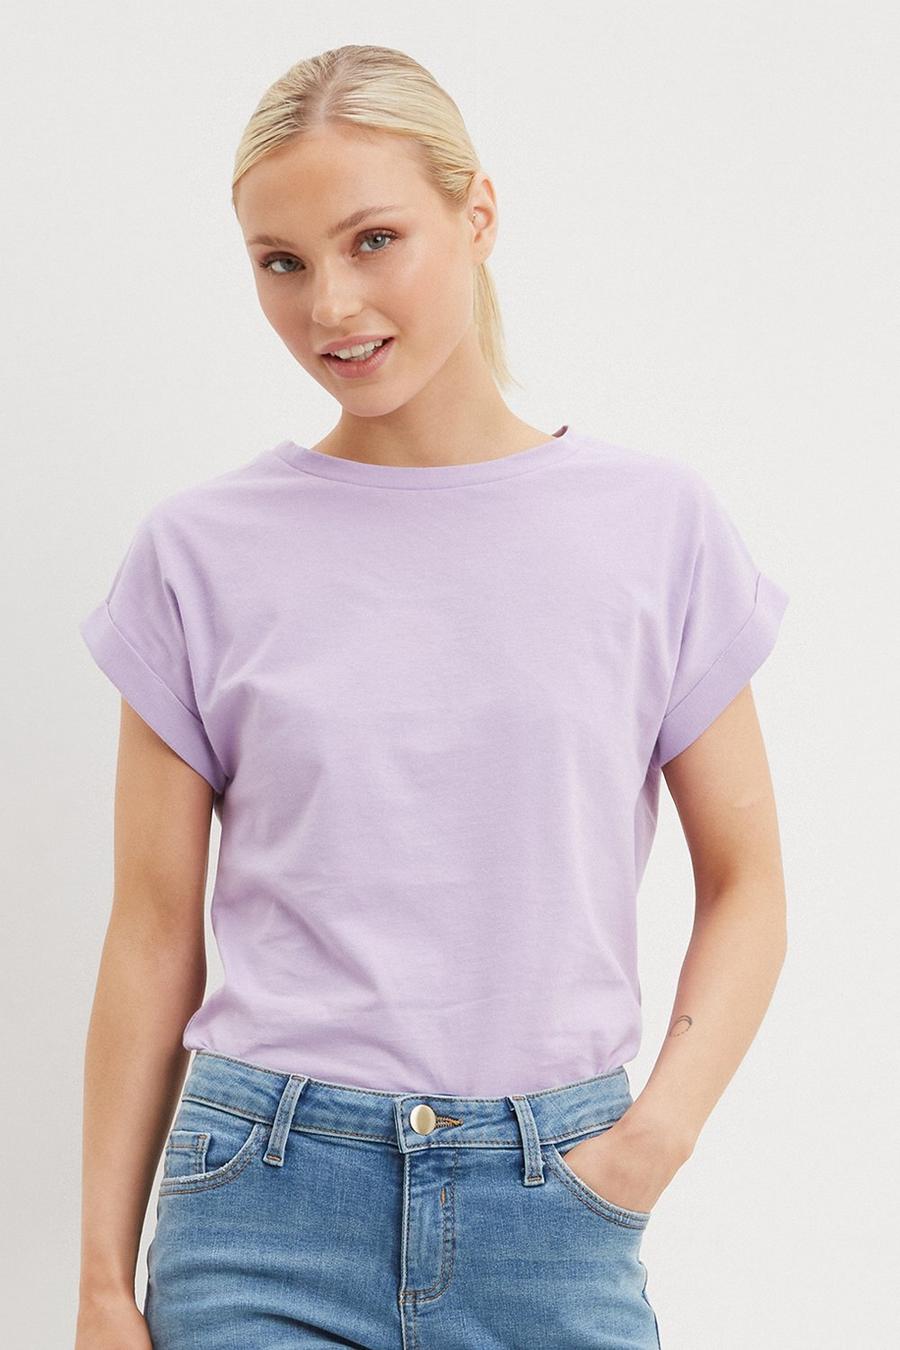 Petite More Sustainable Cotton T-Shirt